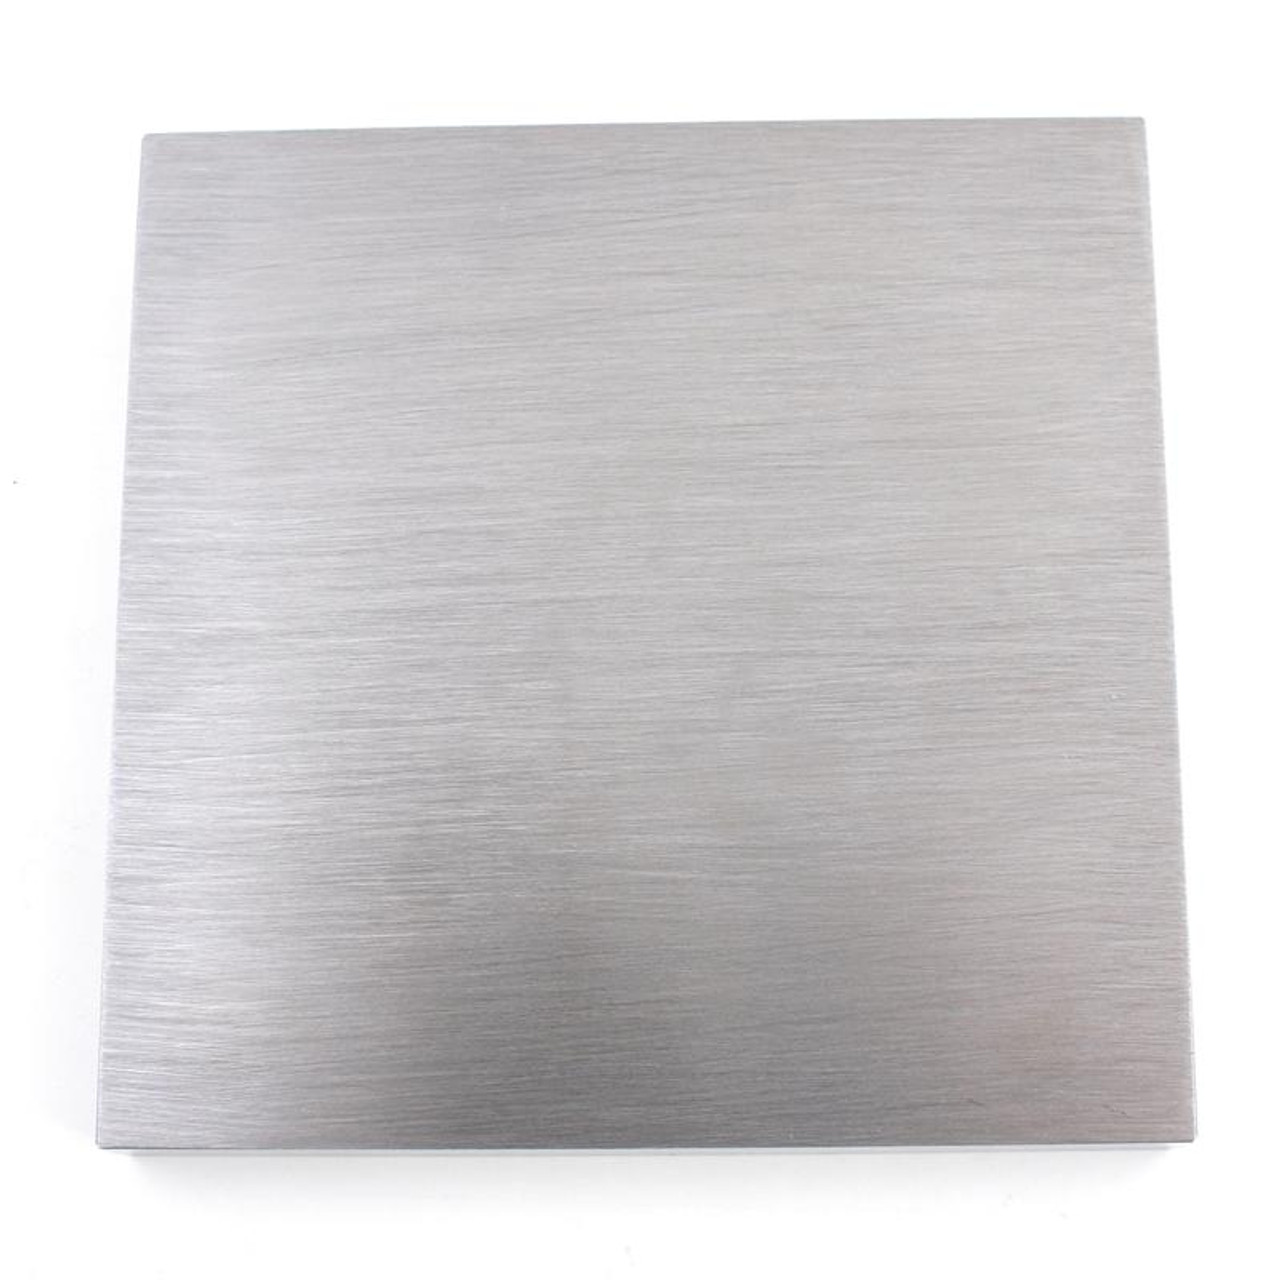 Solid Steel Square Bench Block With Feet Repair Pad 4 x 4 Inches